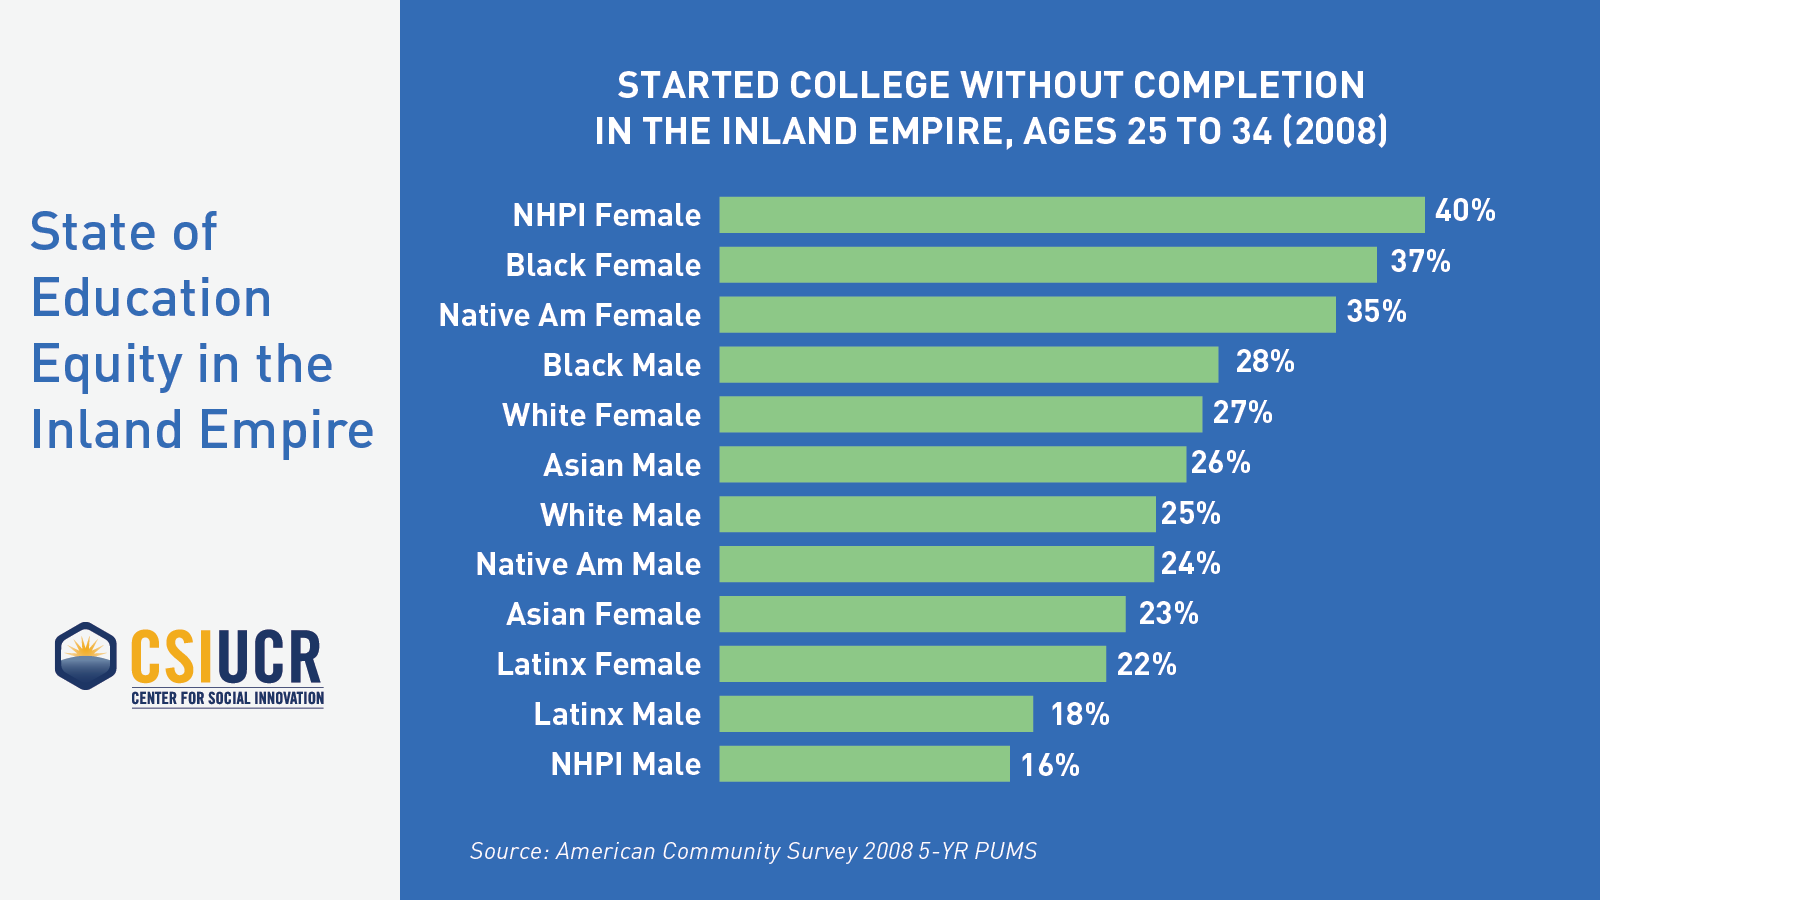 Started College Without Completion in the IE, ages 25 to 34(2008)